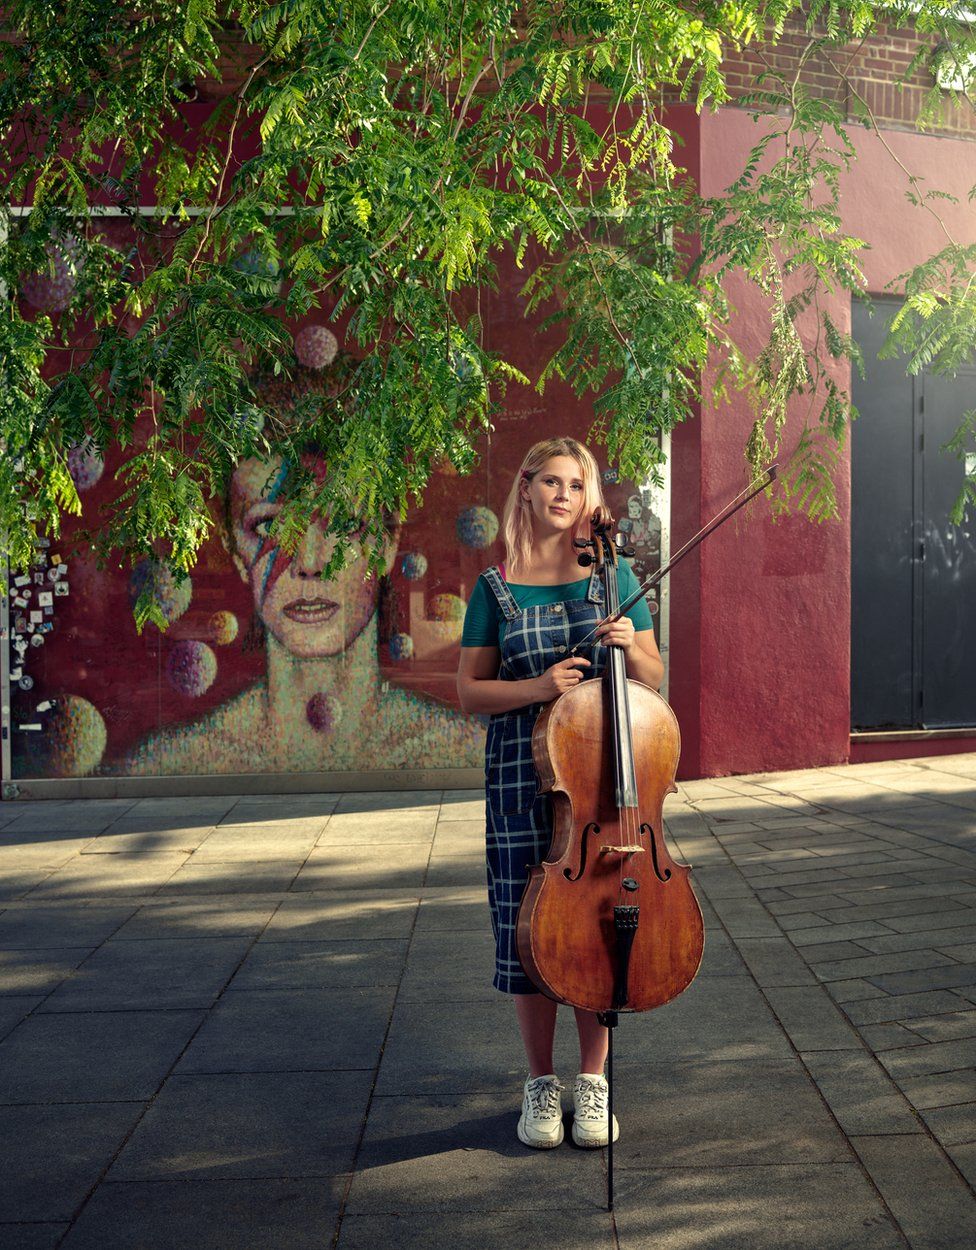 A musician poses with a cello on a street in Brixton, London